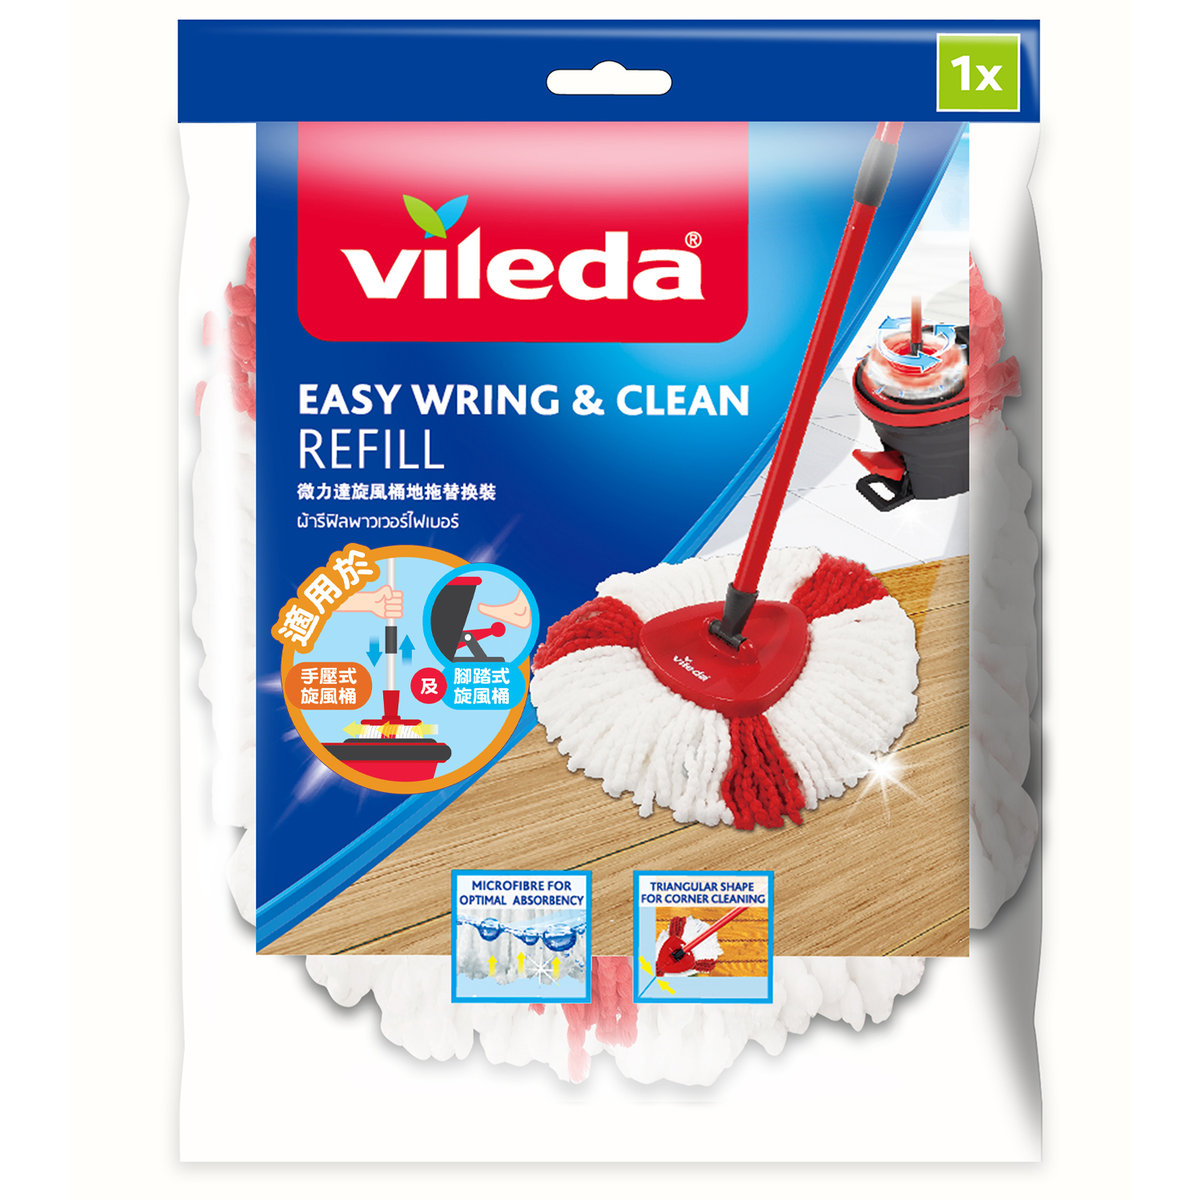 EasyWring & Clean Mop & Bucket Set Refill